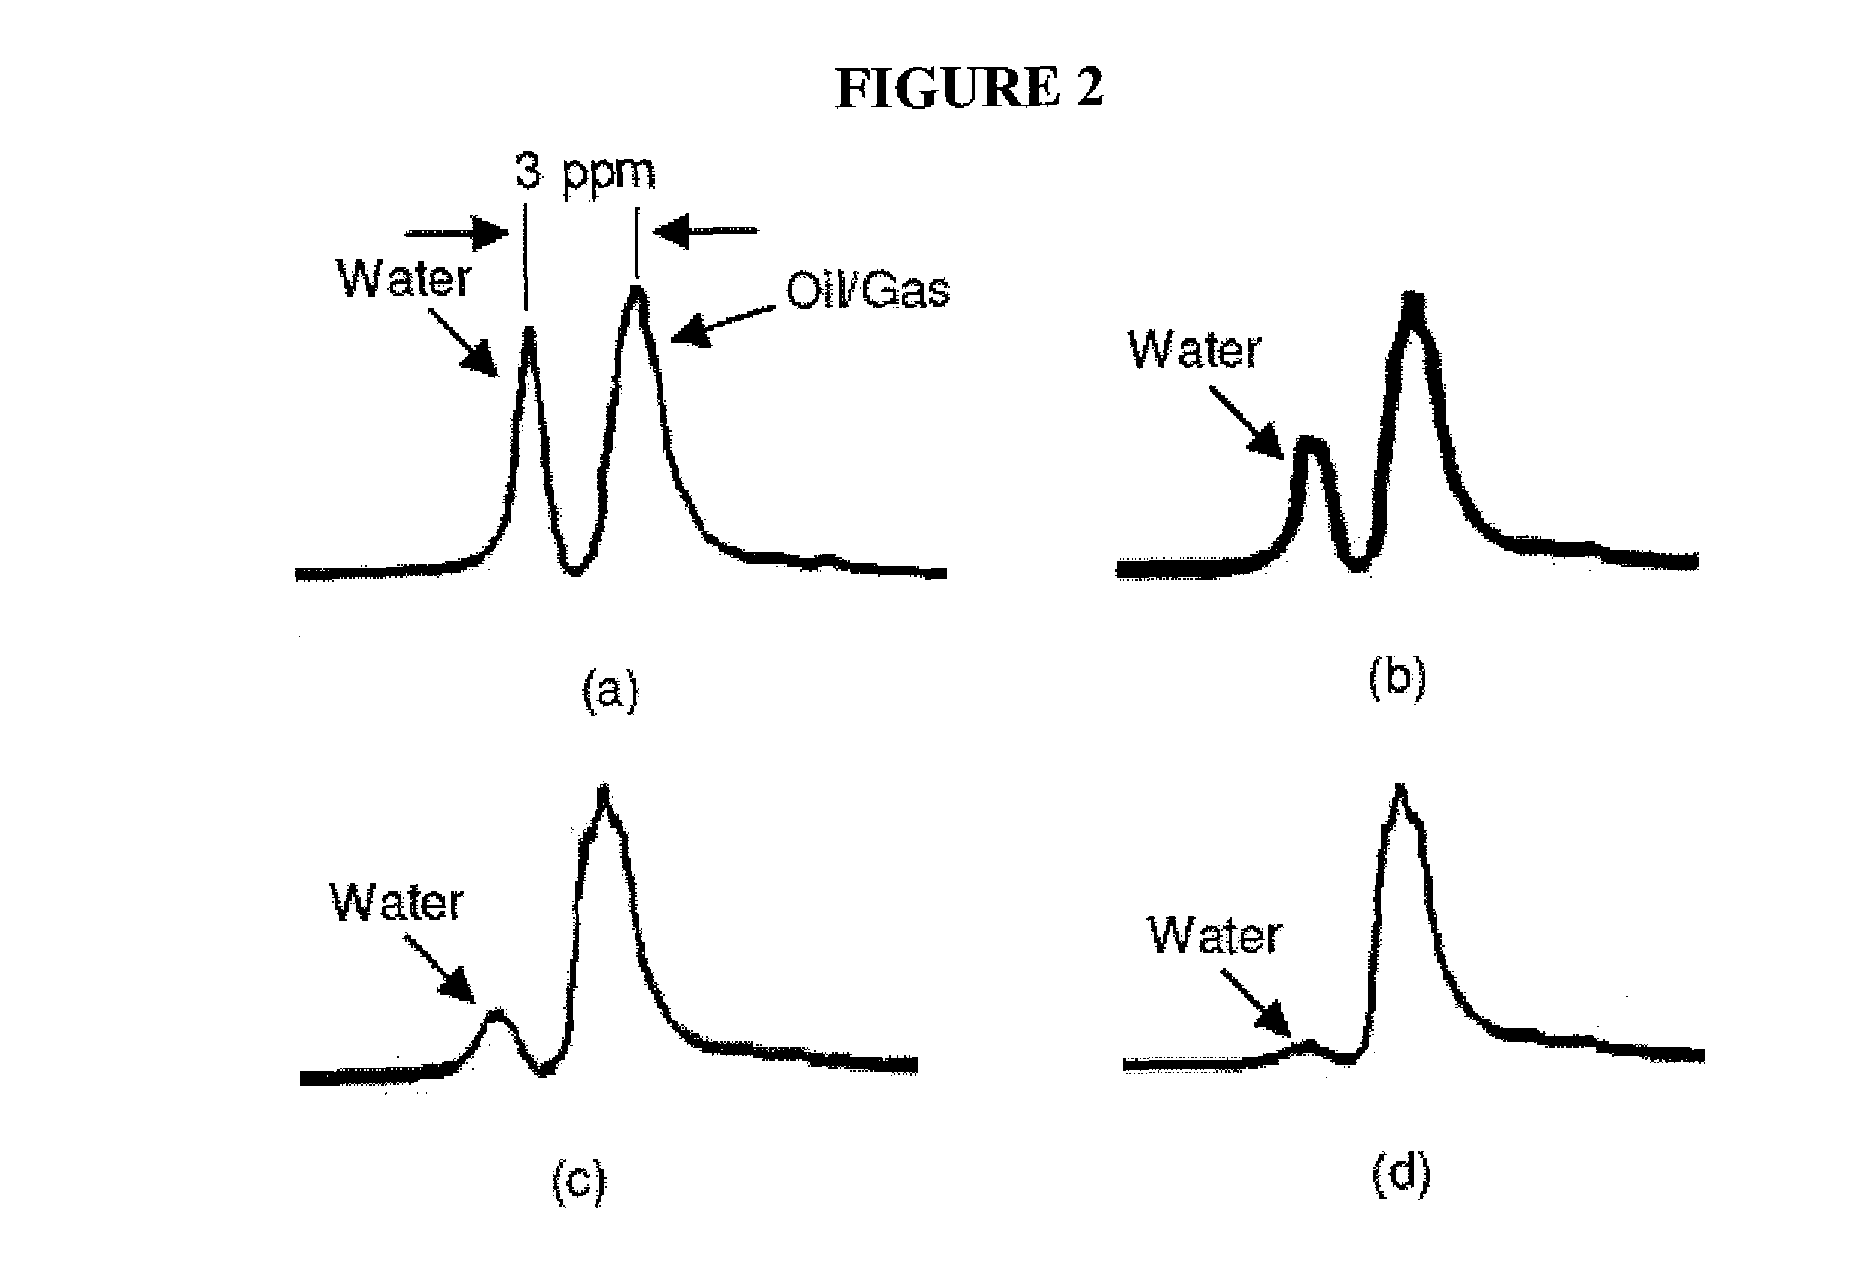 Nmr method of detecting precipitants in a hydrocarbon stream